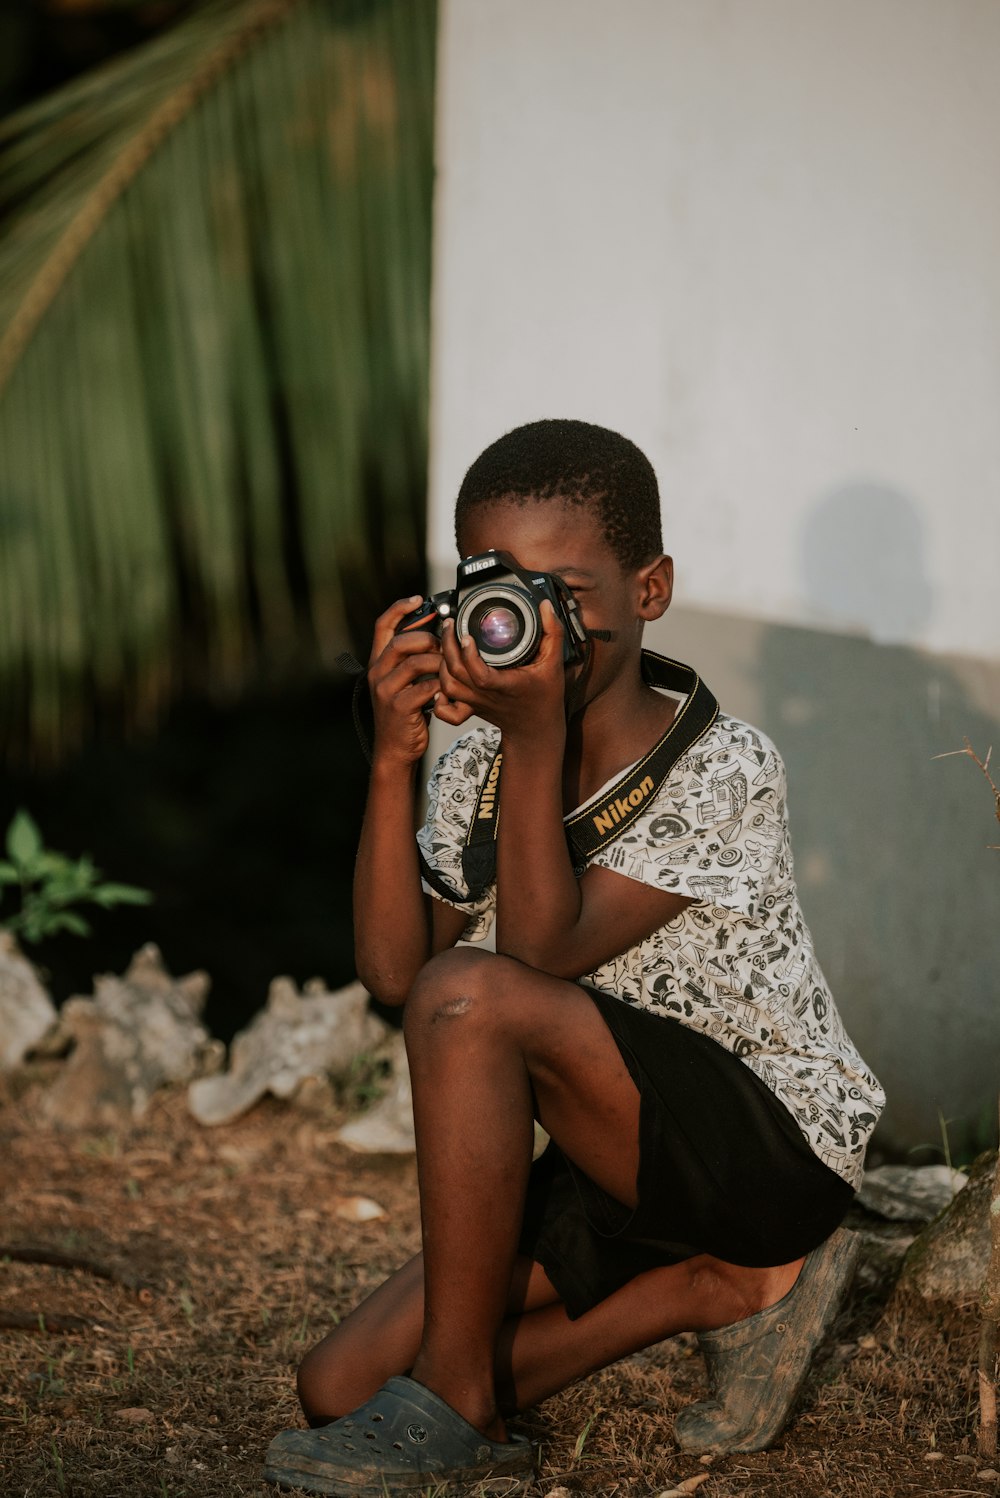 a boy sitting on the ground taking a picture with a camera